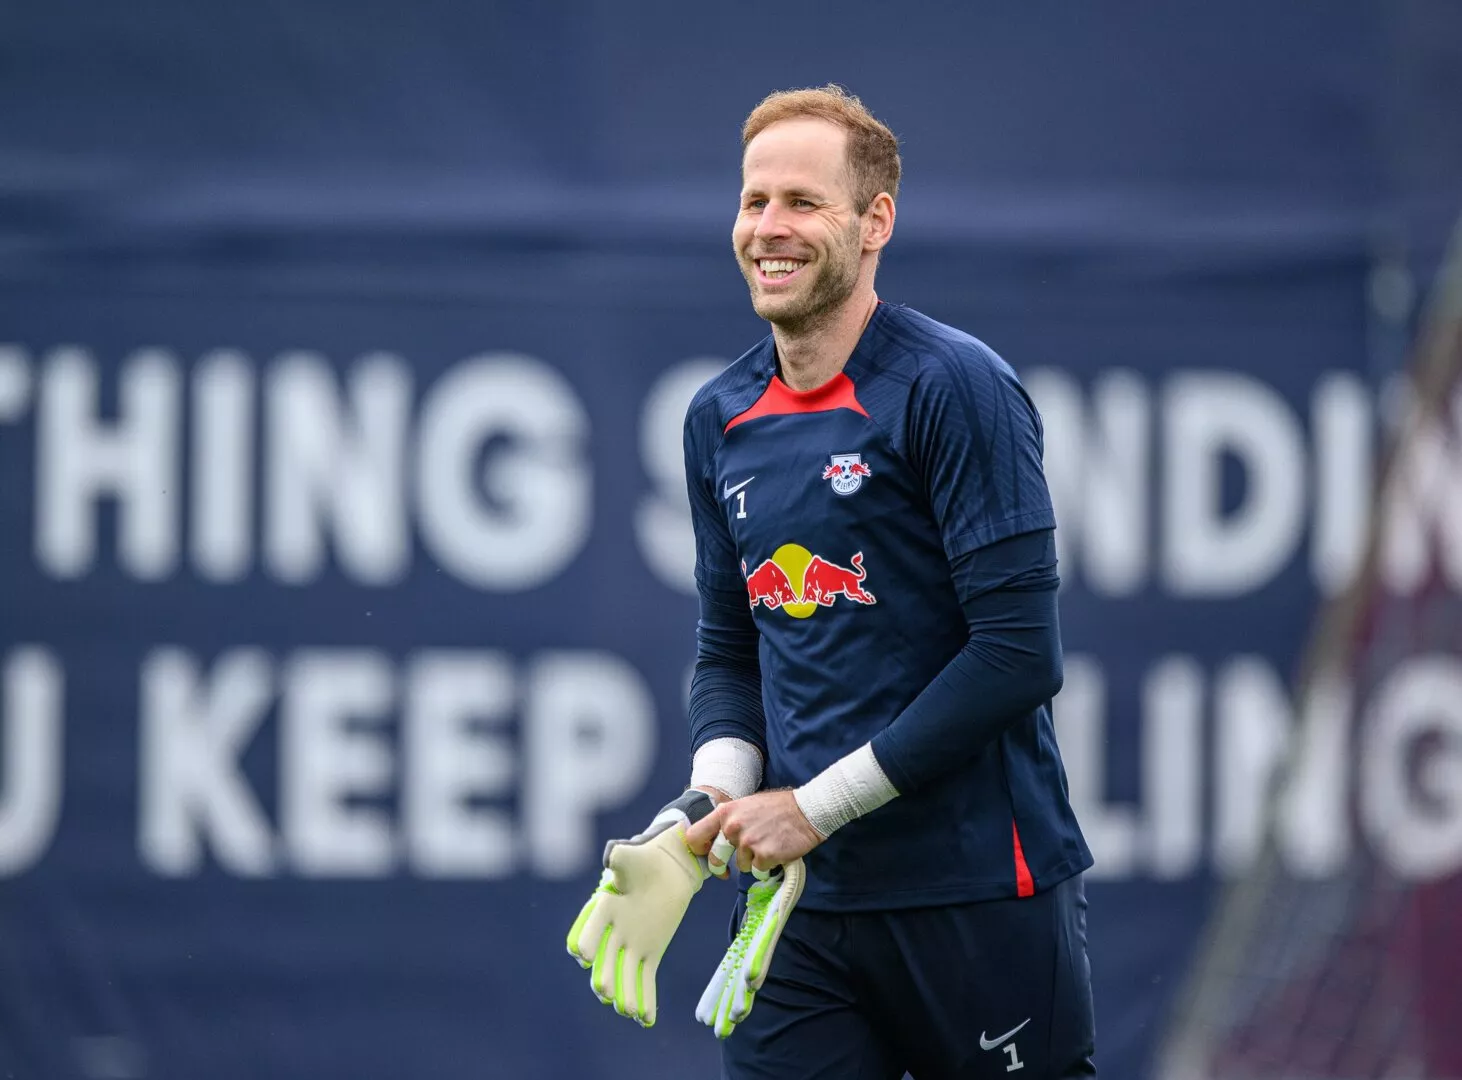 Peter Gulacsi set to return to RB Leipzig after year-long absence